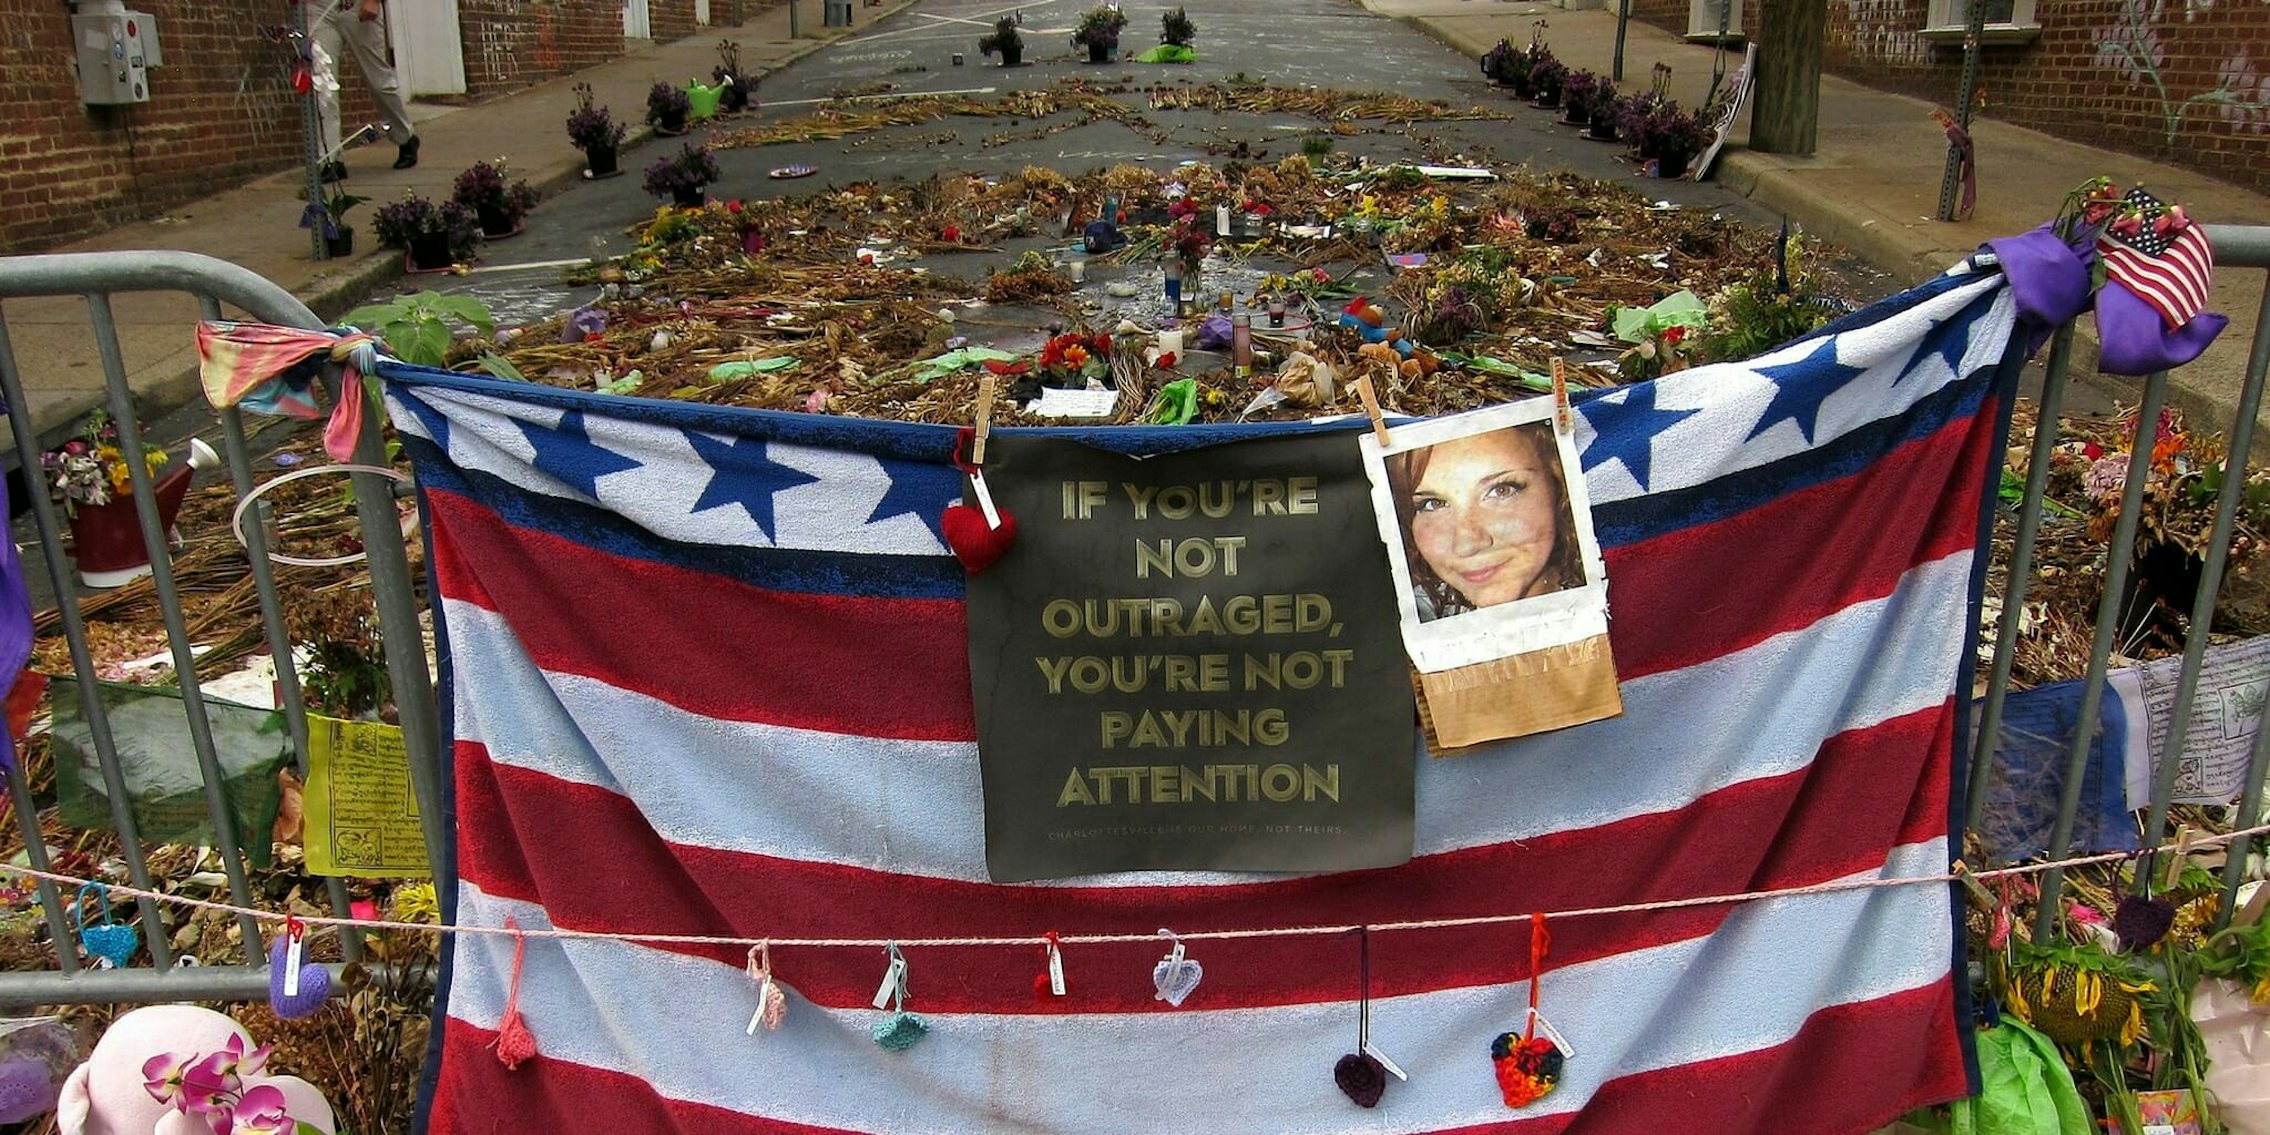 A memorial for Heather Heyer, victim of the white supremacist Charlottesville rally